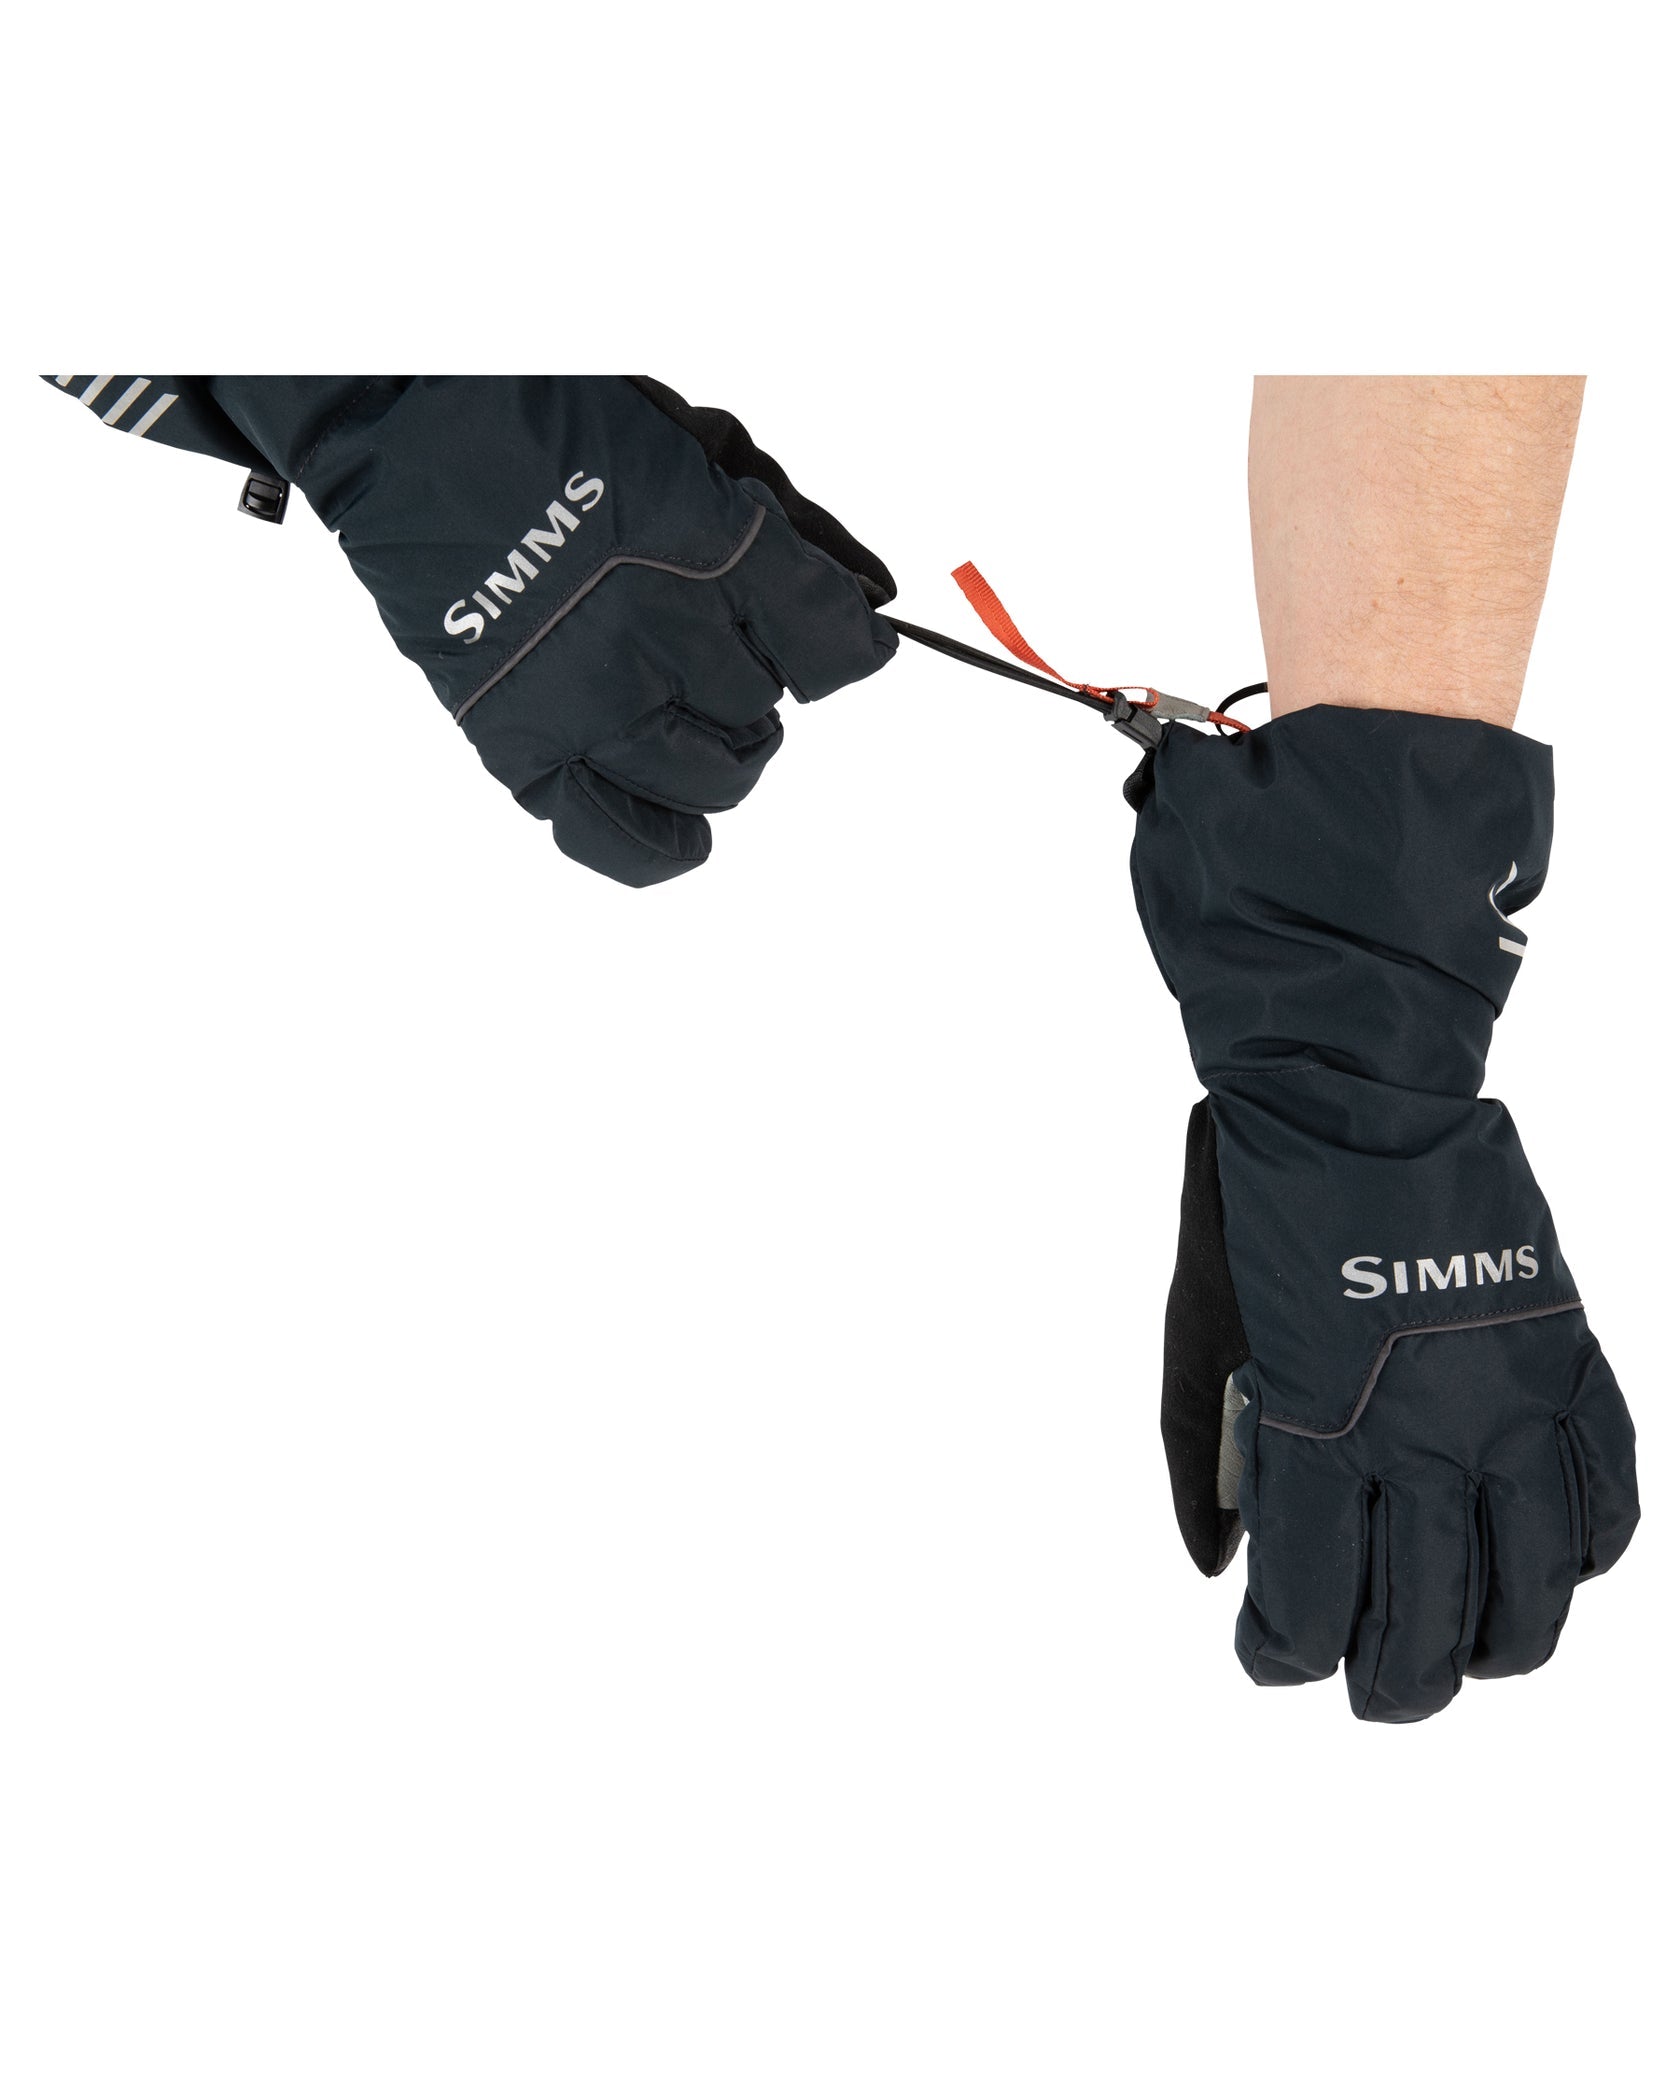 Simms Challenger Insulated Glove - Black - L